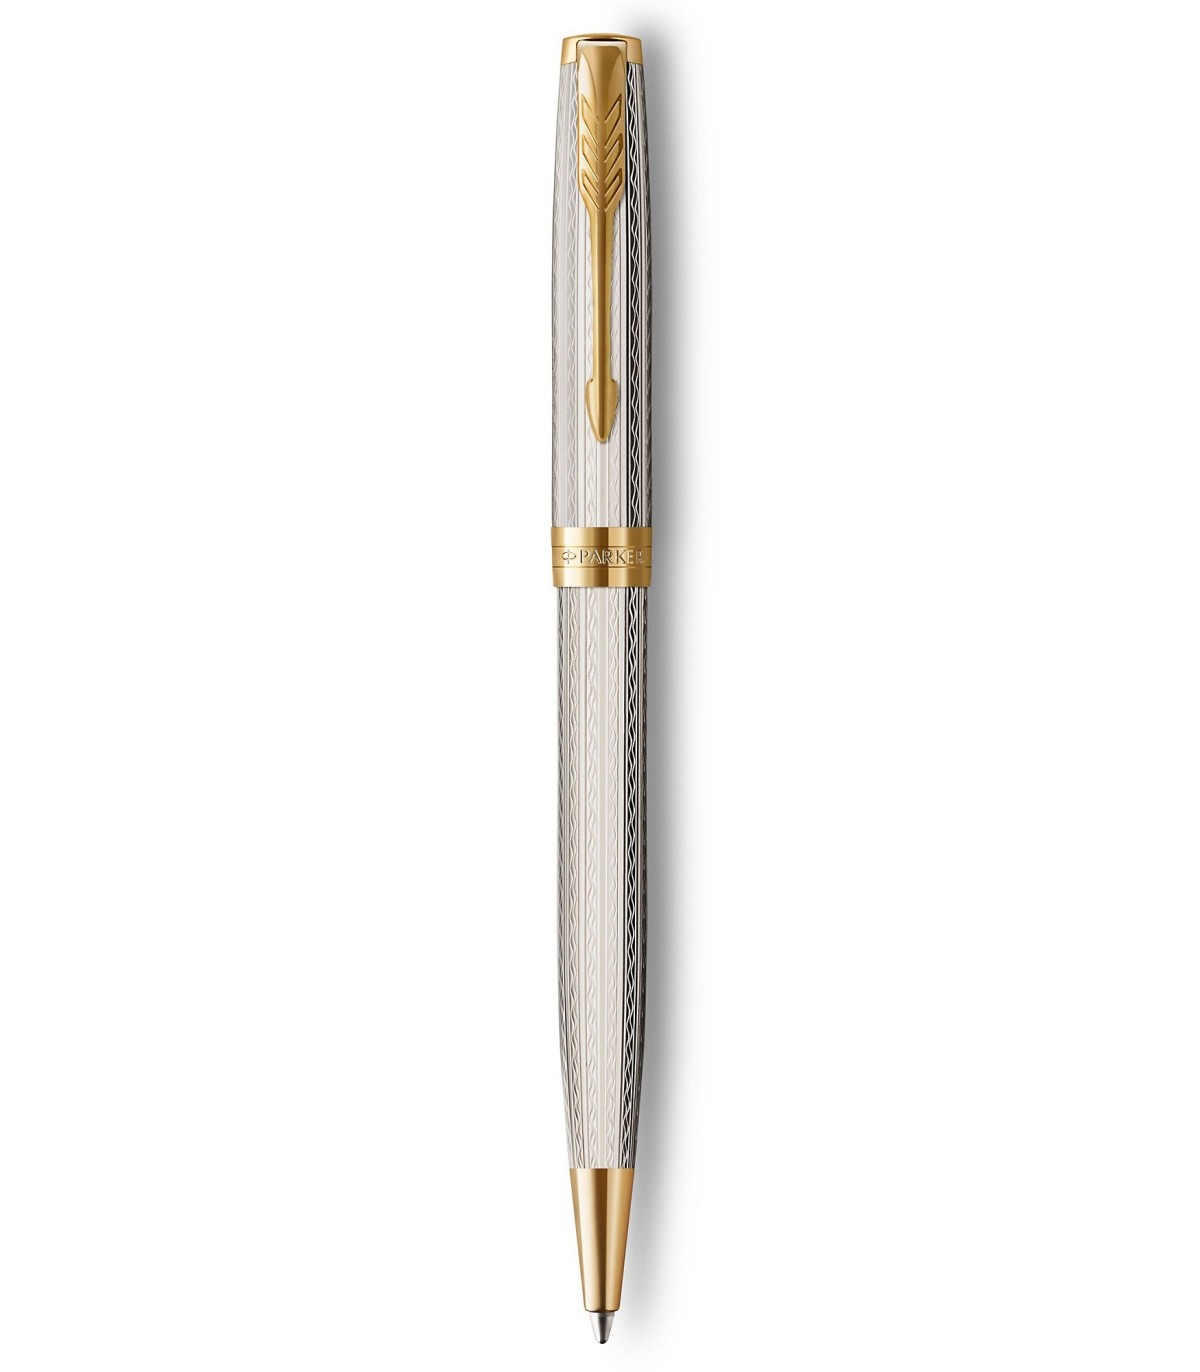 Parker recharges pour stylo bille, pointe moyenne